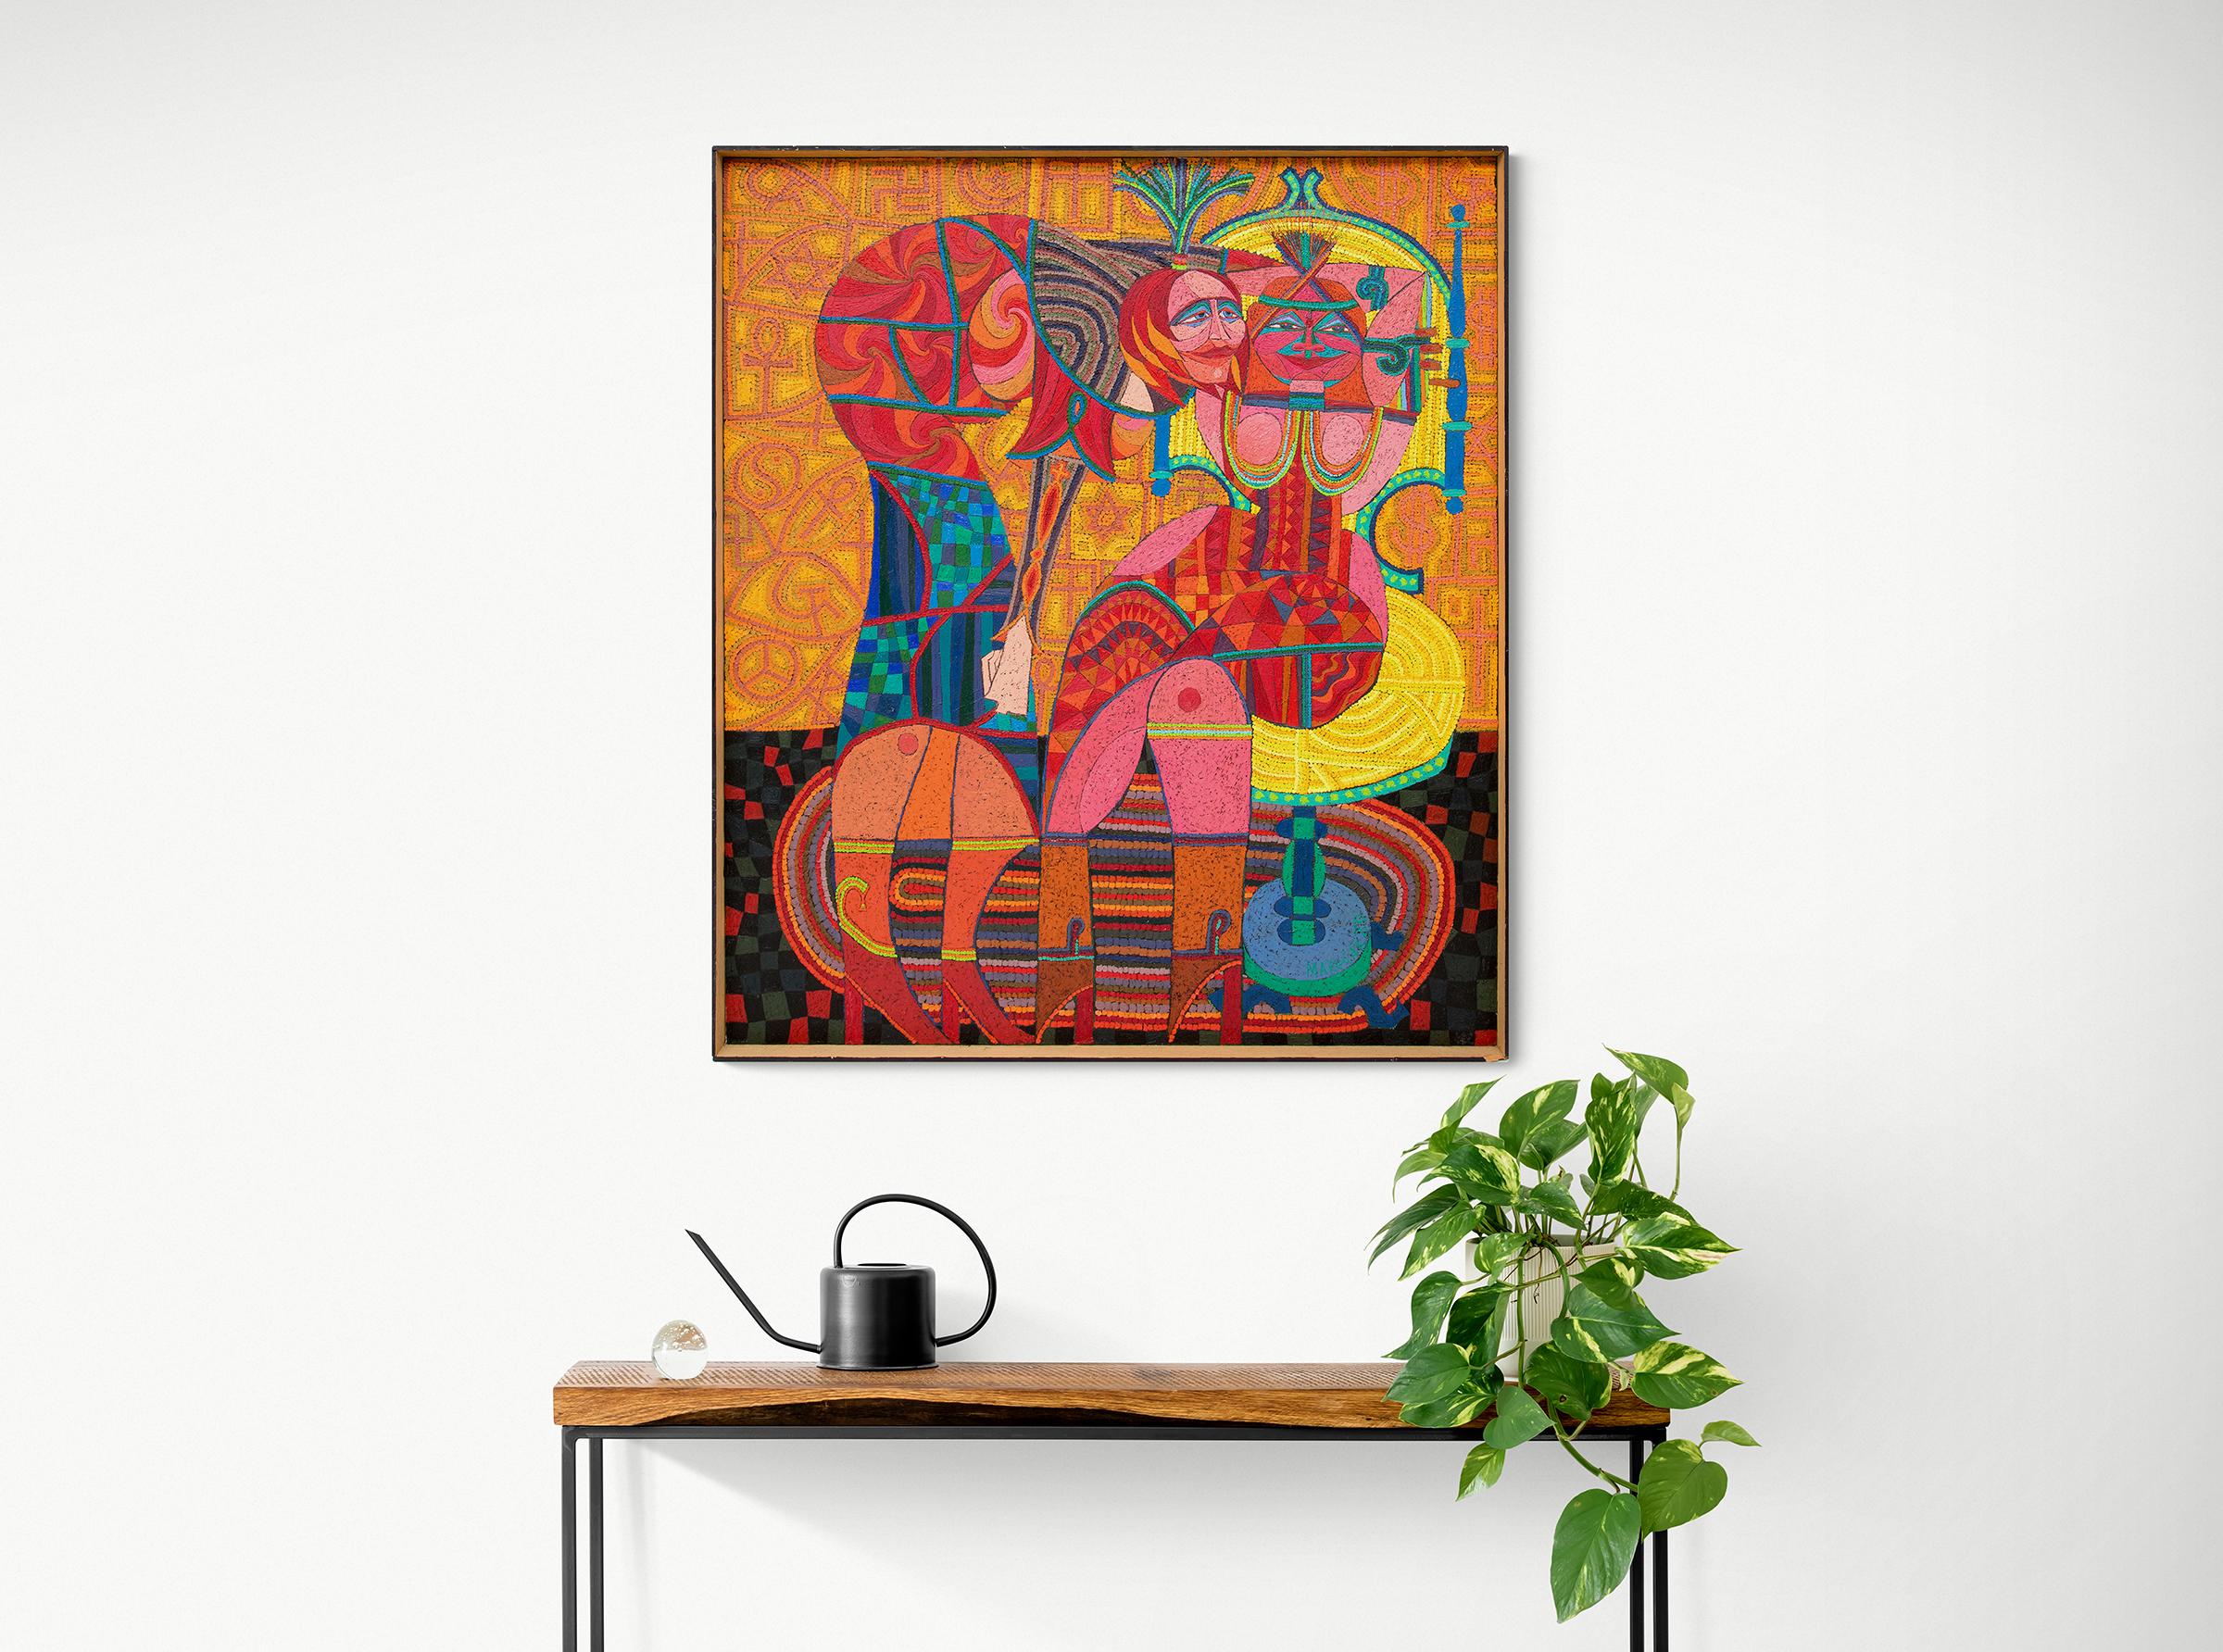 Sybils Telling Cosmic Jokes On Mankind, Framed Figurative Abstract Oil Painting For Sale 2